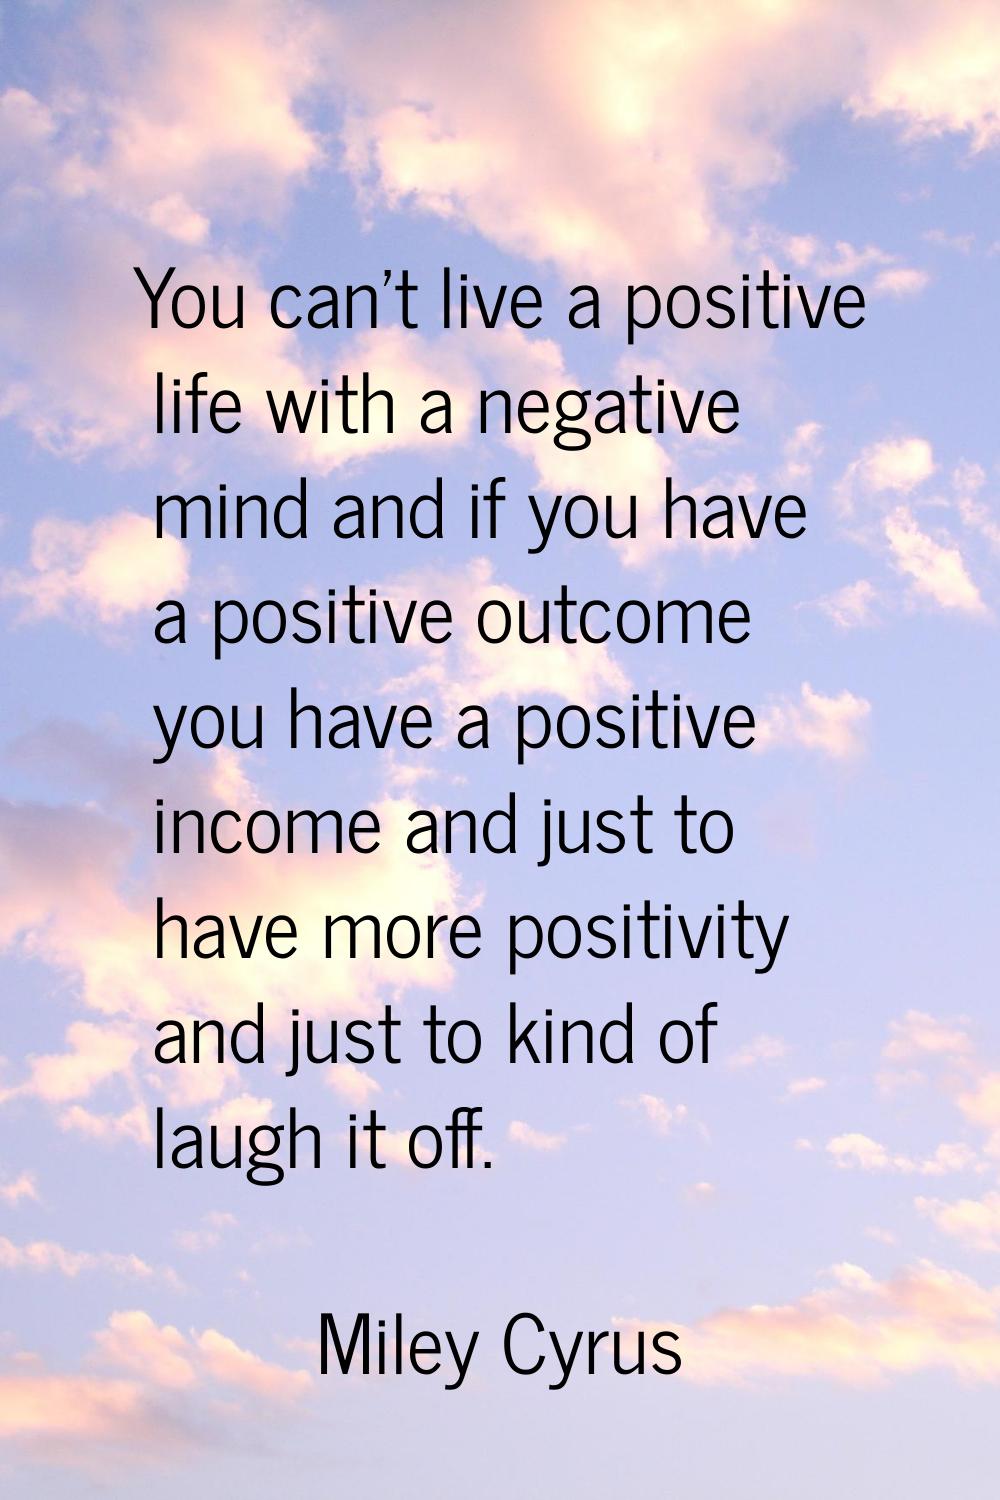 You can't live a positive life with a negative mind and if you have a positive outcome you have a p